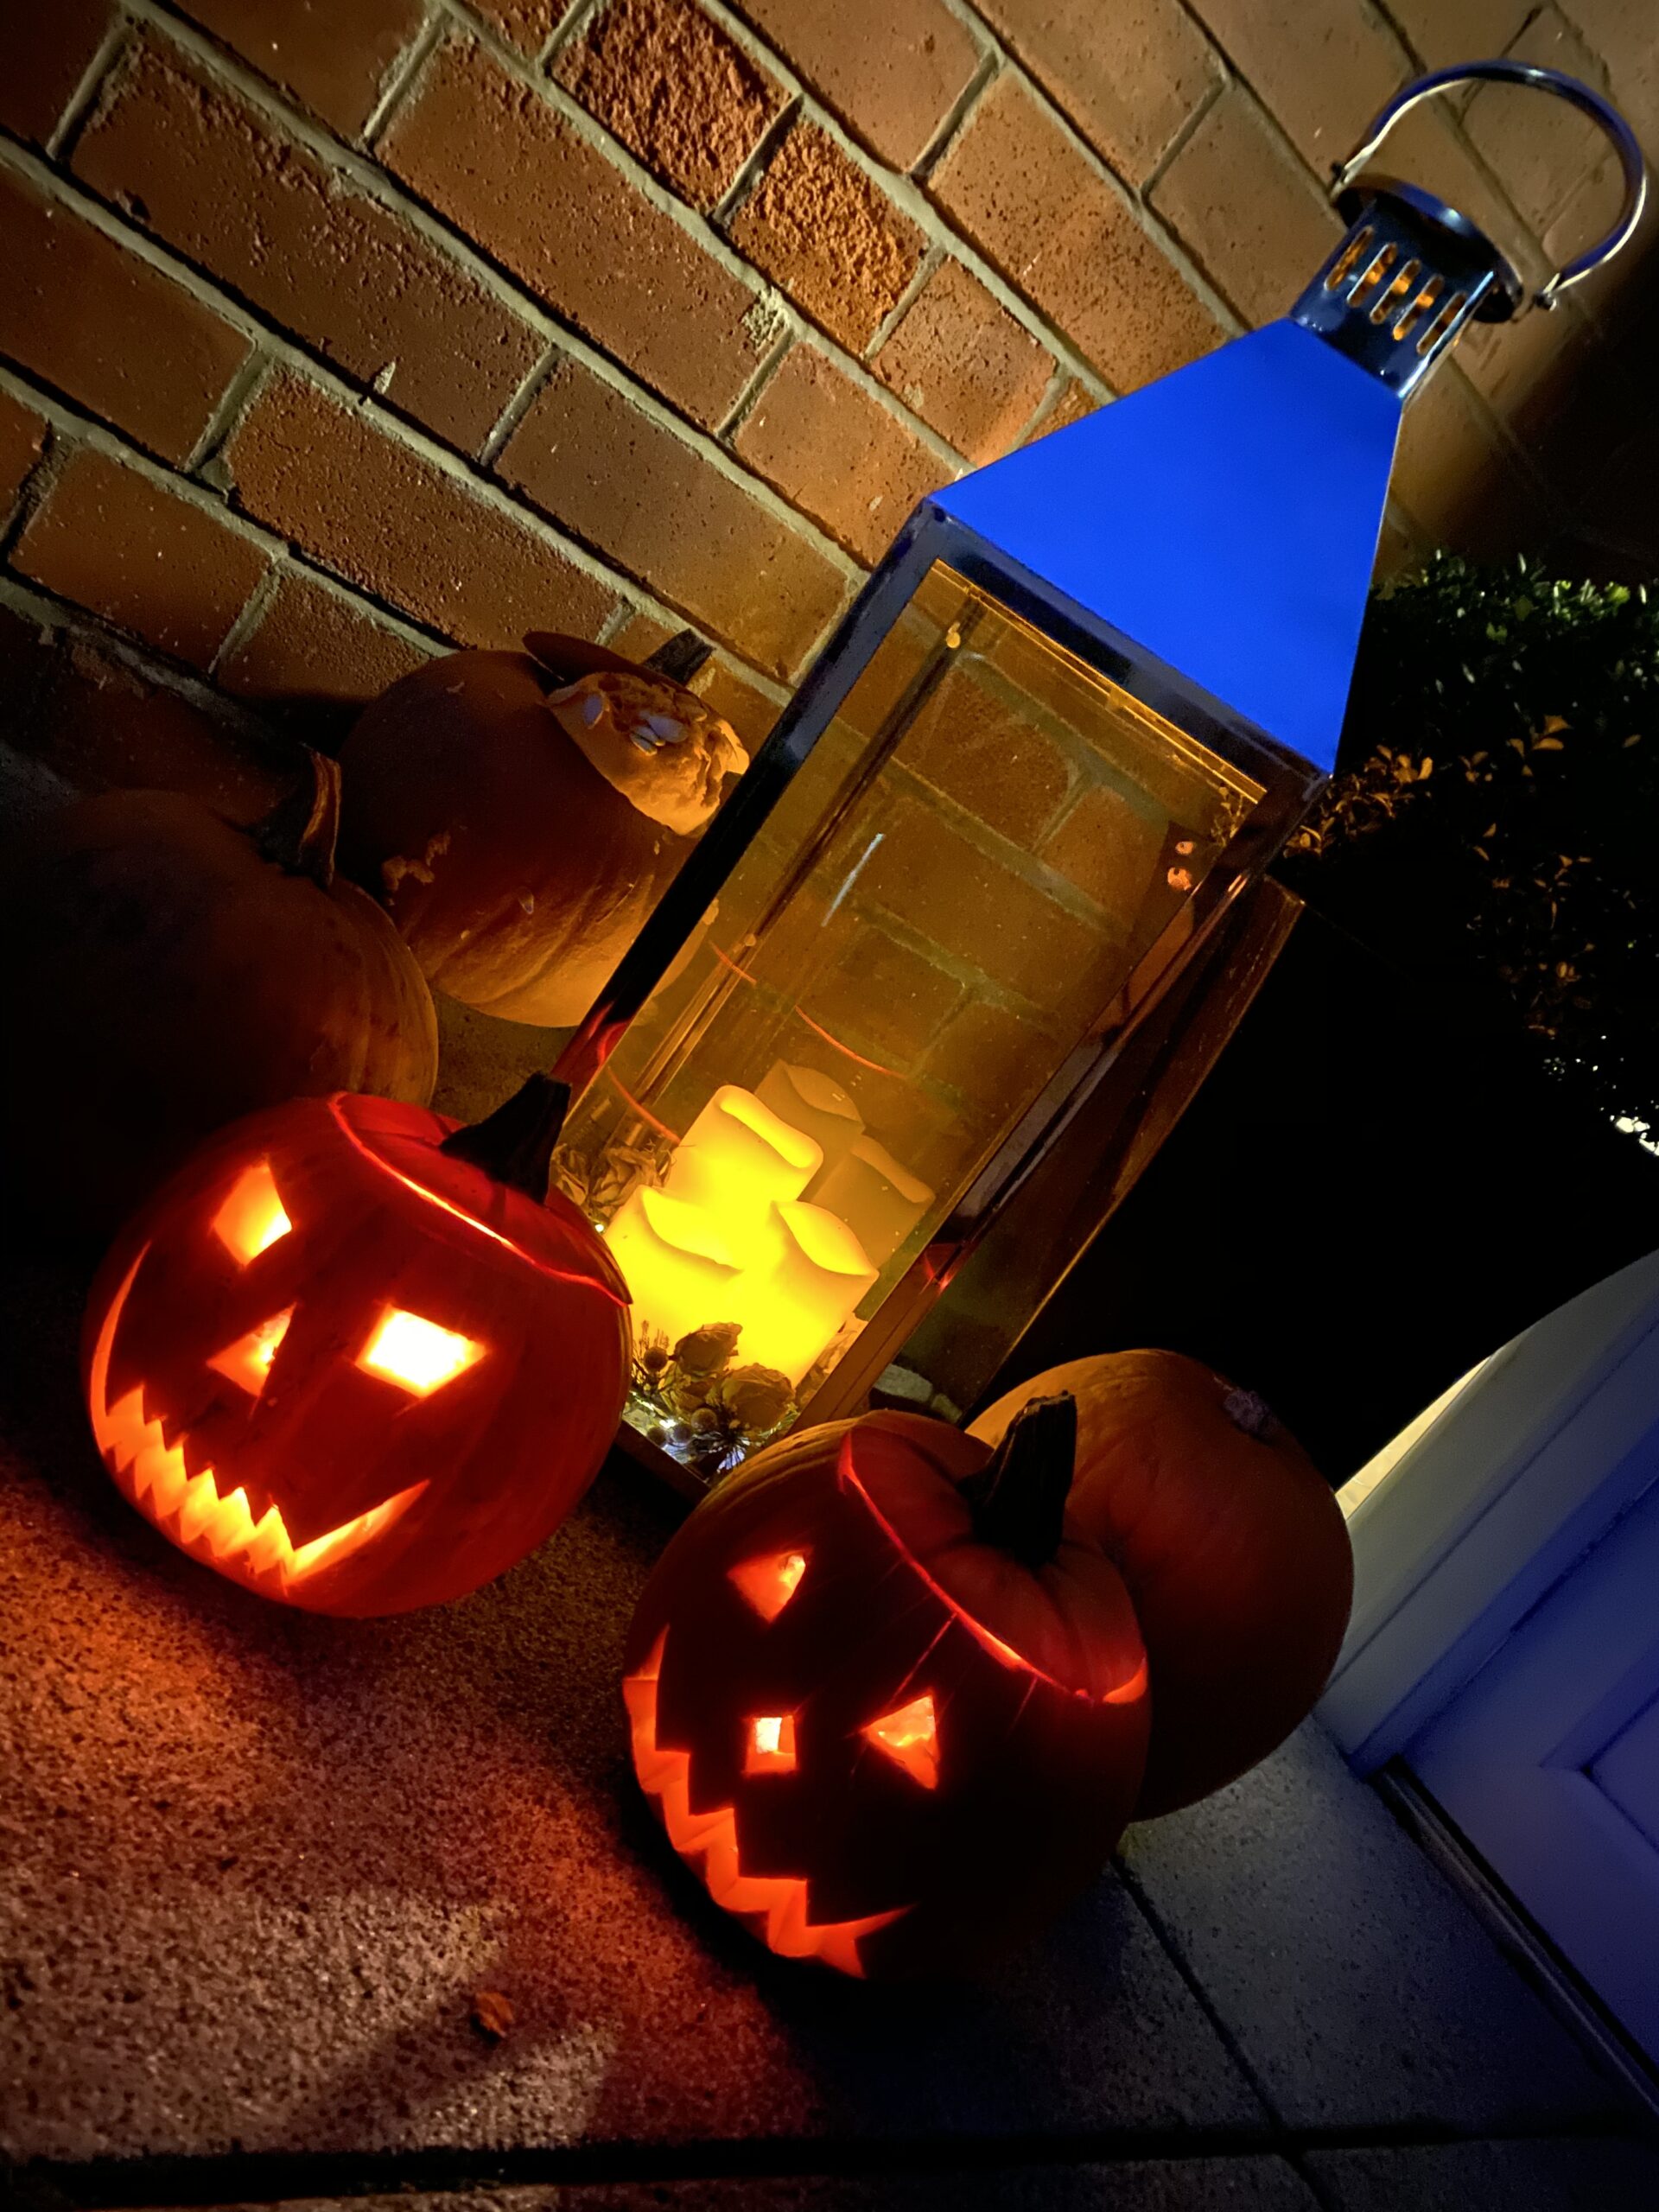 This is a Halloween image showing lit pumpkins and candles